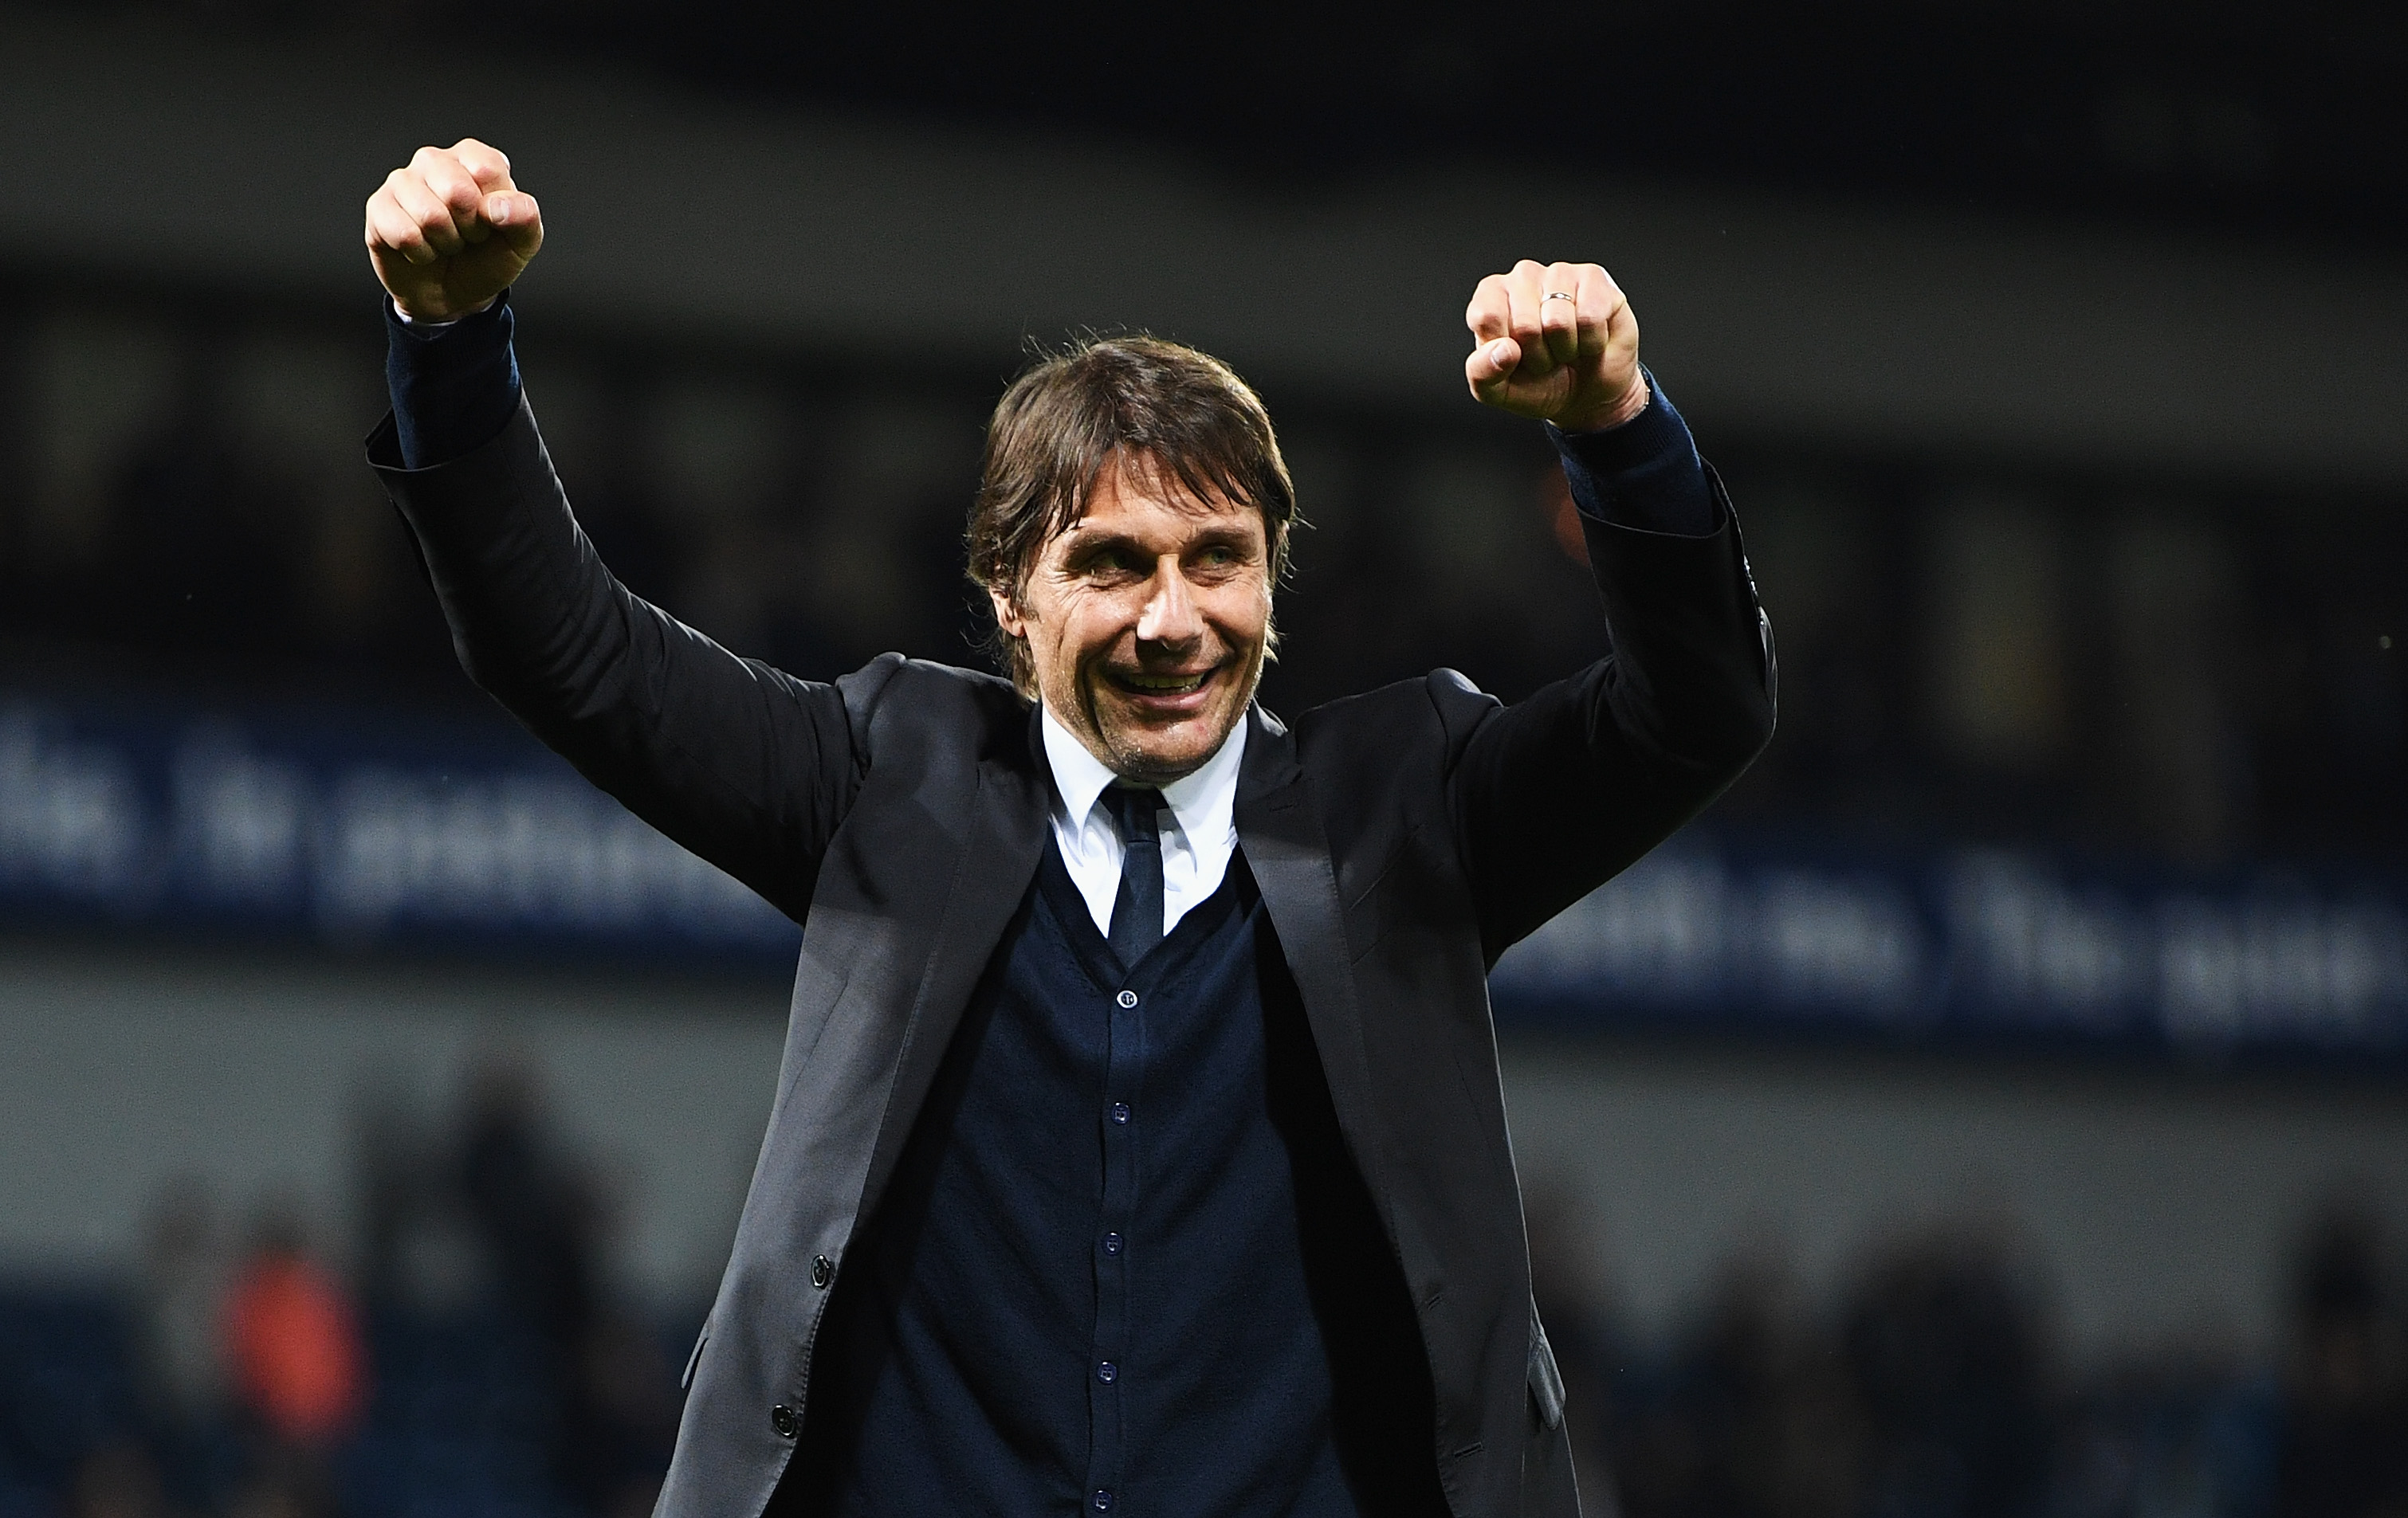 WEST BROMWICH, ENGLAND - MAY 12:  Antonio Conte, Manager of Chelsea celebrates winning the league after the Premier League match between West Bromwich Albion and Chelsea at The Hawthorns on May 12, 2017 in West Bromwich, England. Chelsea are crowned champions after a 1-0 victory against West Bromwich Albion.  (Photo by Michael Regan/Getty Images)